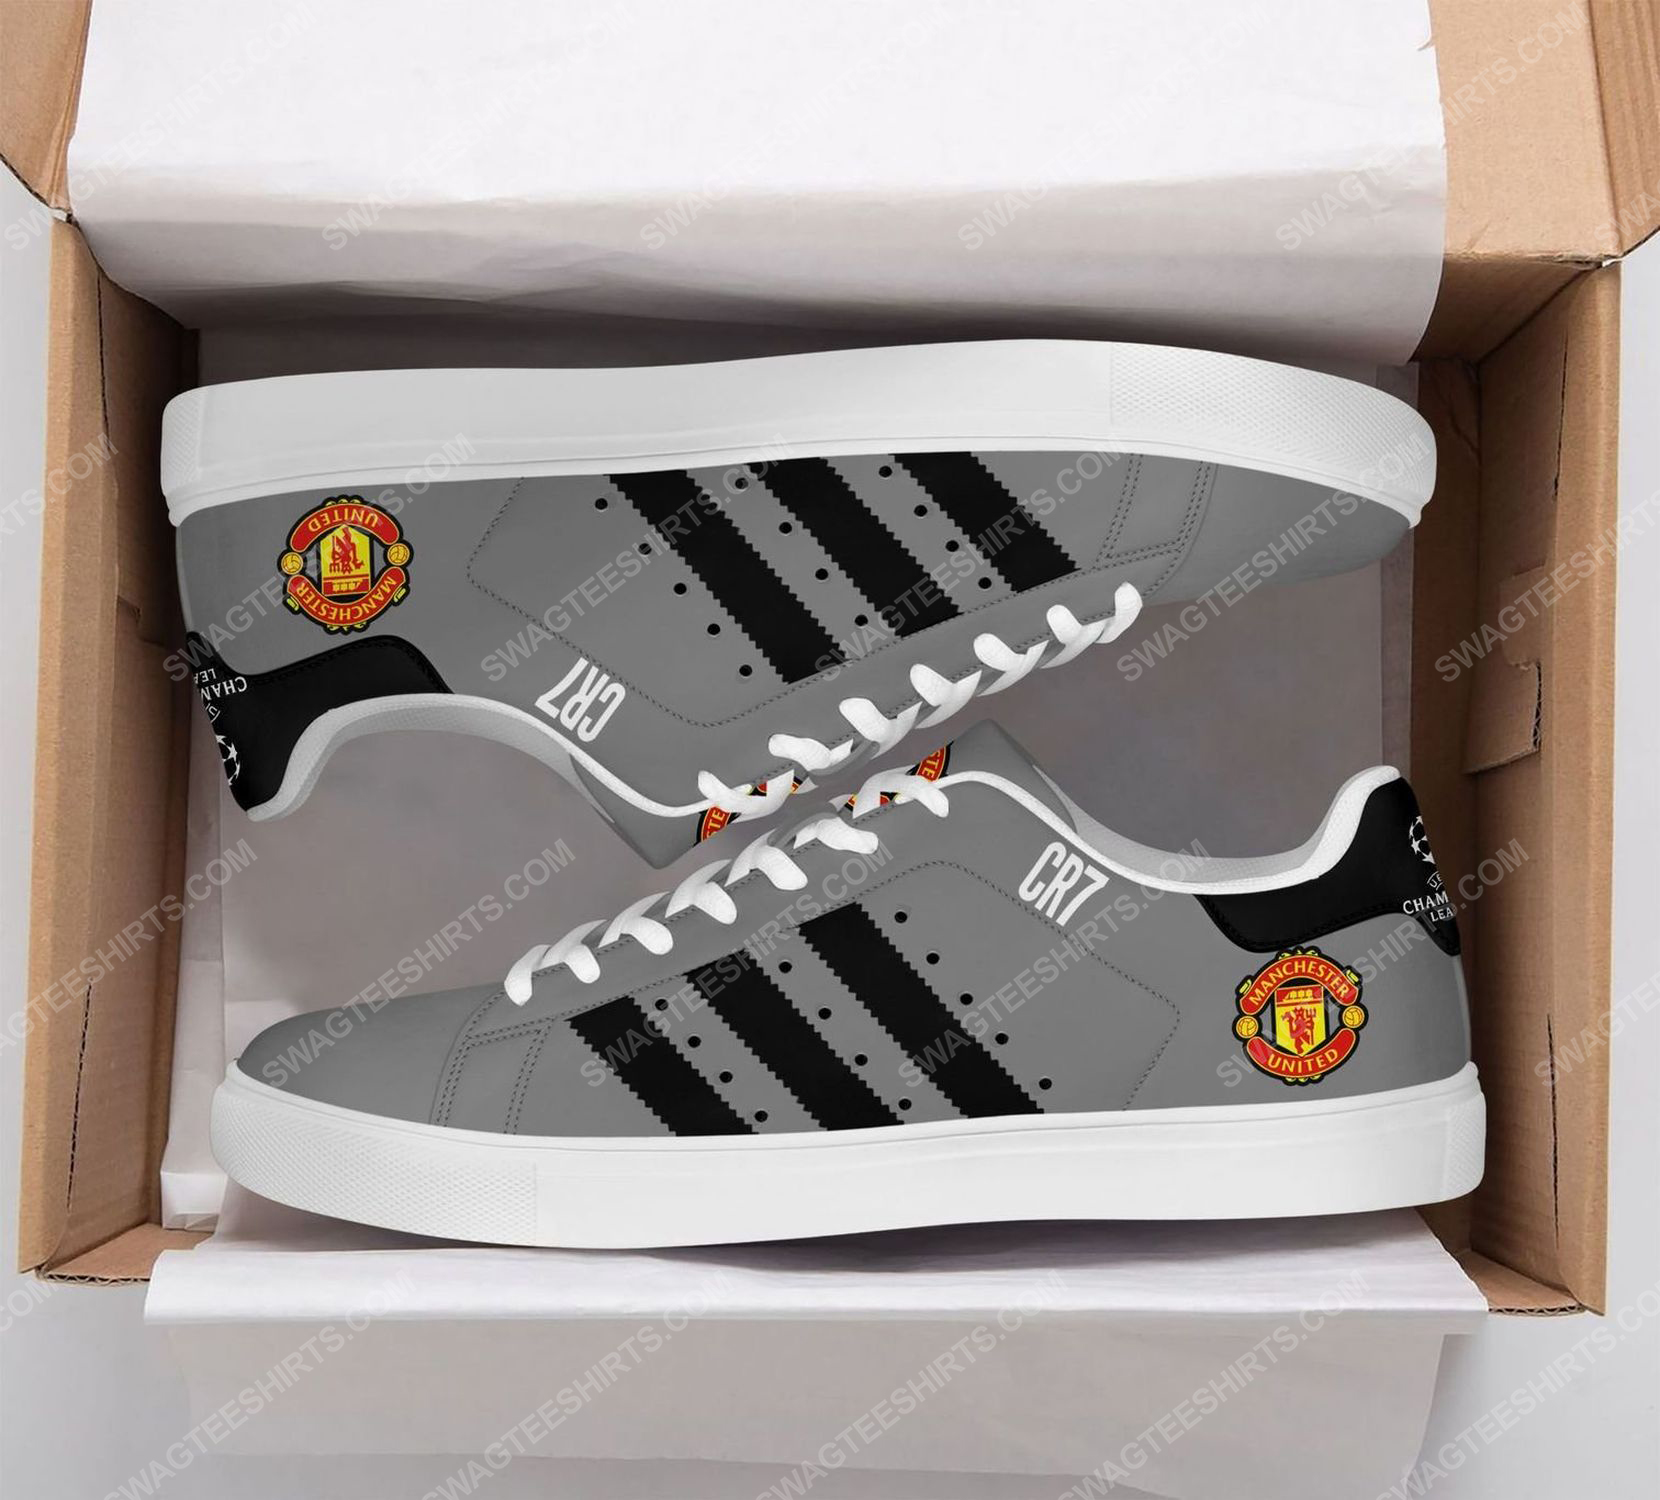 [special edition] Manchester united football club stan smith shoes – Maria